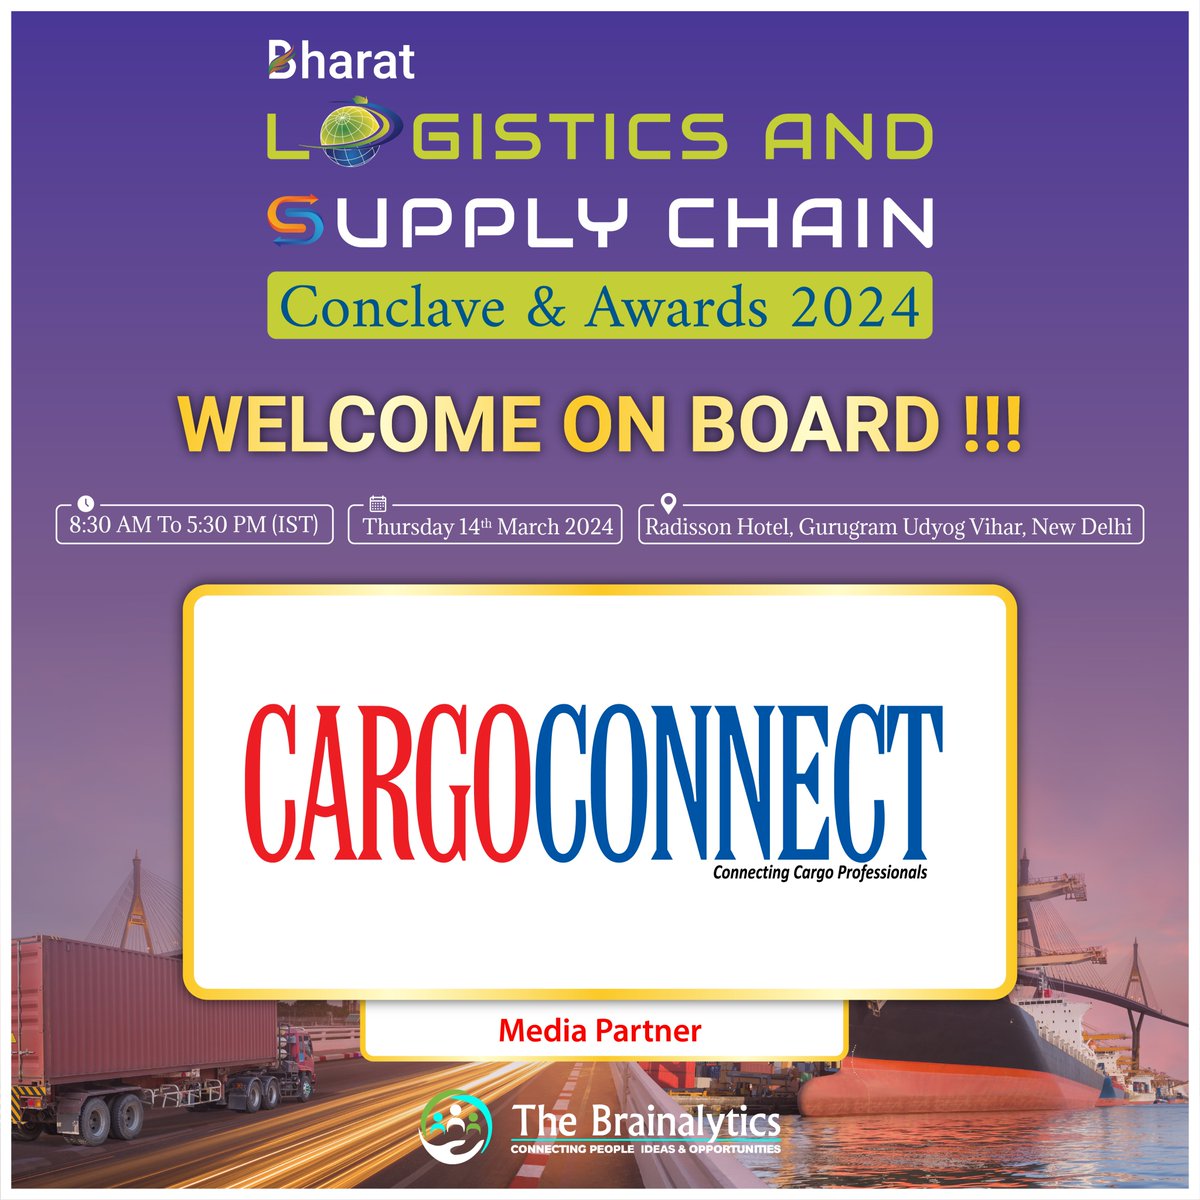 We welcome CARGOCONNECT on board as our 𝐌𝐞𝐝𝐢𝐚 𝐏𝐚𝐫𝐭𝐧𝐞𝐫 for the 𝟐𝐧𝐝 𝐄𝐝𝐢𝐭𝐢𝐨𝐧 𝐁𝐡𝐚𝐫𝐚𝐭 𝐋𝐨𝐠𝐢𝐬𝐭𝐢𝐜𝐬 𝐚𝐧𝐝 𝐒𝐮𝐩𝐩𝐥𝐲 𝐂𝐡𝐚𝐢𝐧 𝐂𝐨𝐧𝐜𝐥𝐚𝐯𝐞 & 𝐀𝐰𝐚𝐫𝐝𝐬 𝟐𝟎𝟐𝟒 happening on 𝟏𝟒𝐭𝐡 𝐌𝐚𝐫𝐜𝐡 𝟐𝟎𝟐𝟒, 𝐍𝐞𝐰 𝐃𝐞𝐥𝐡𝐢.